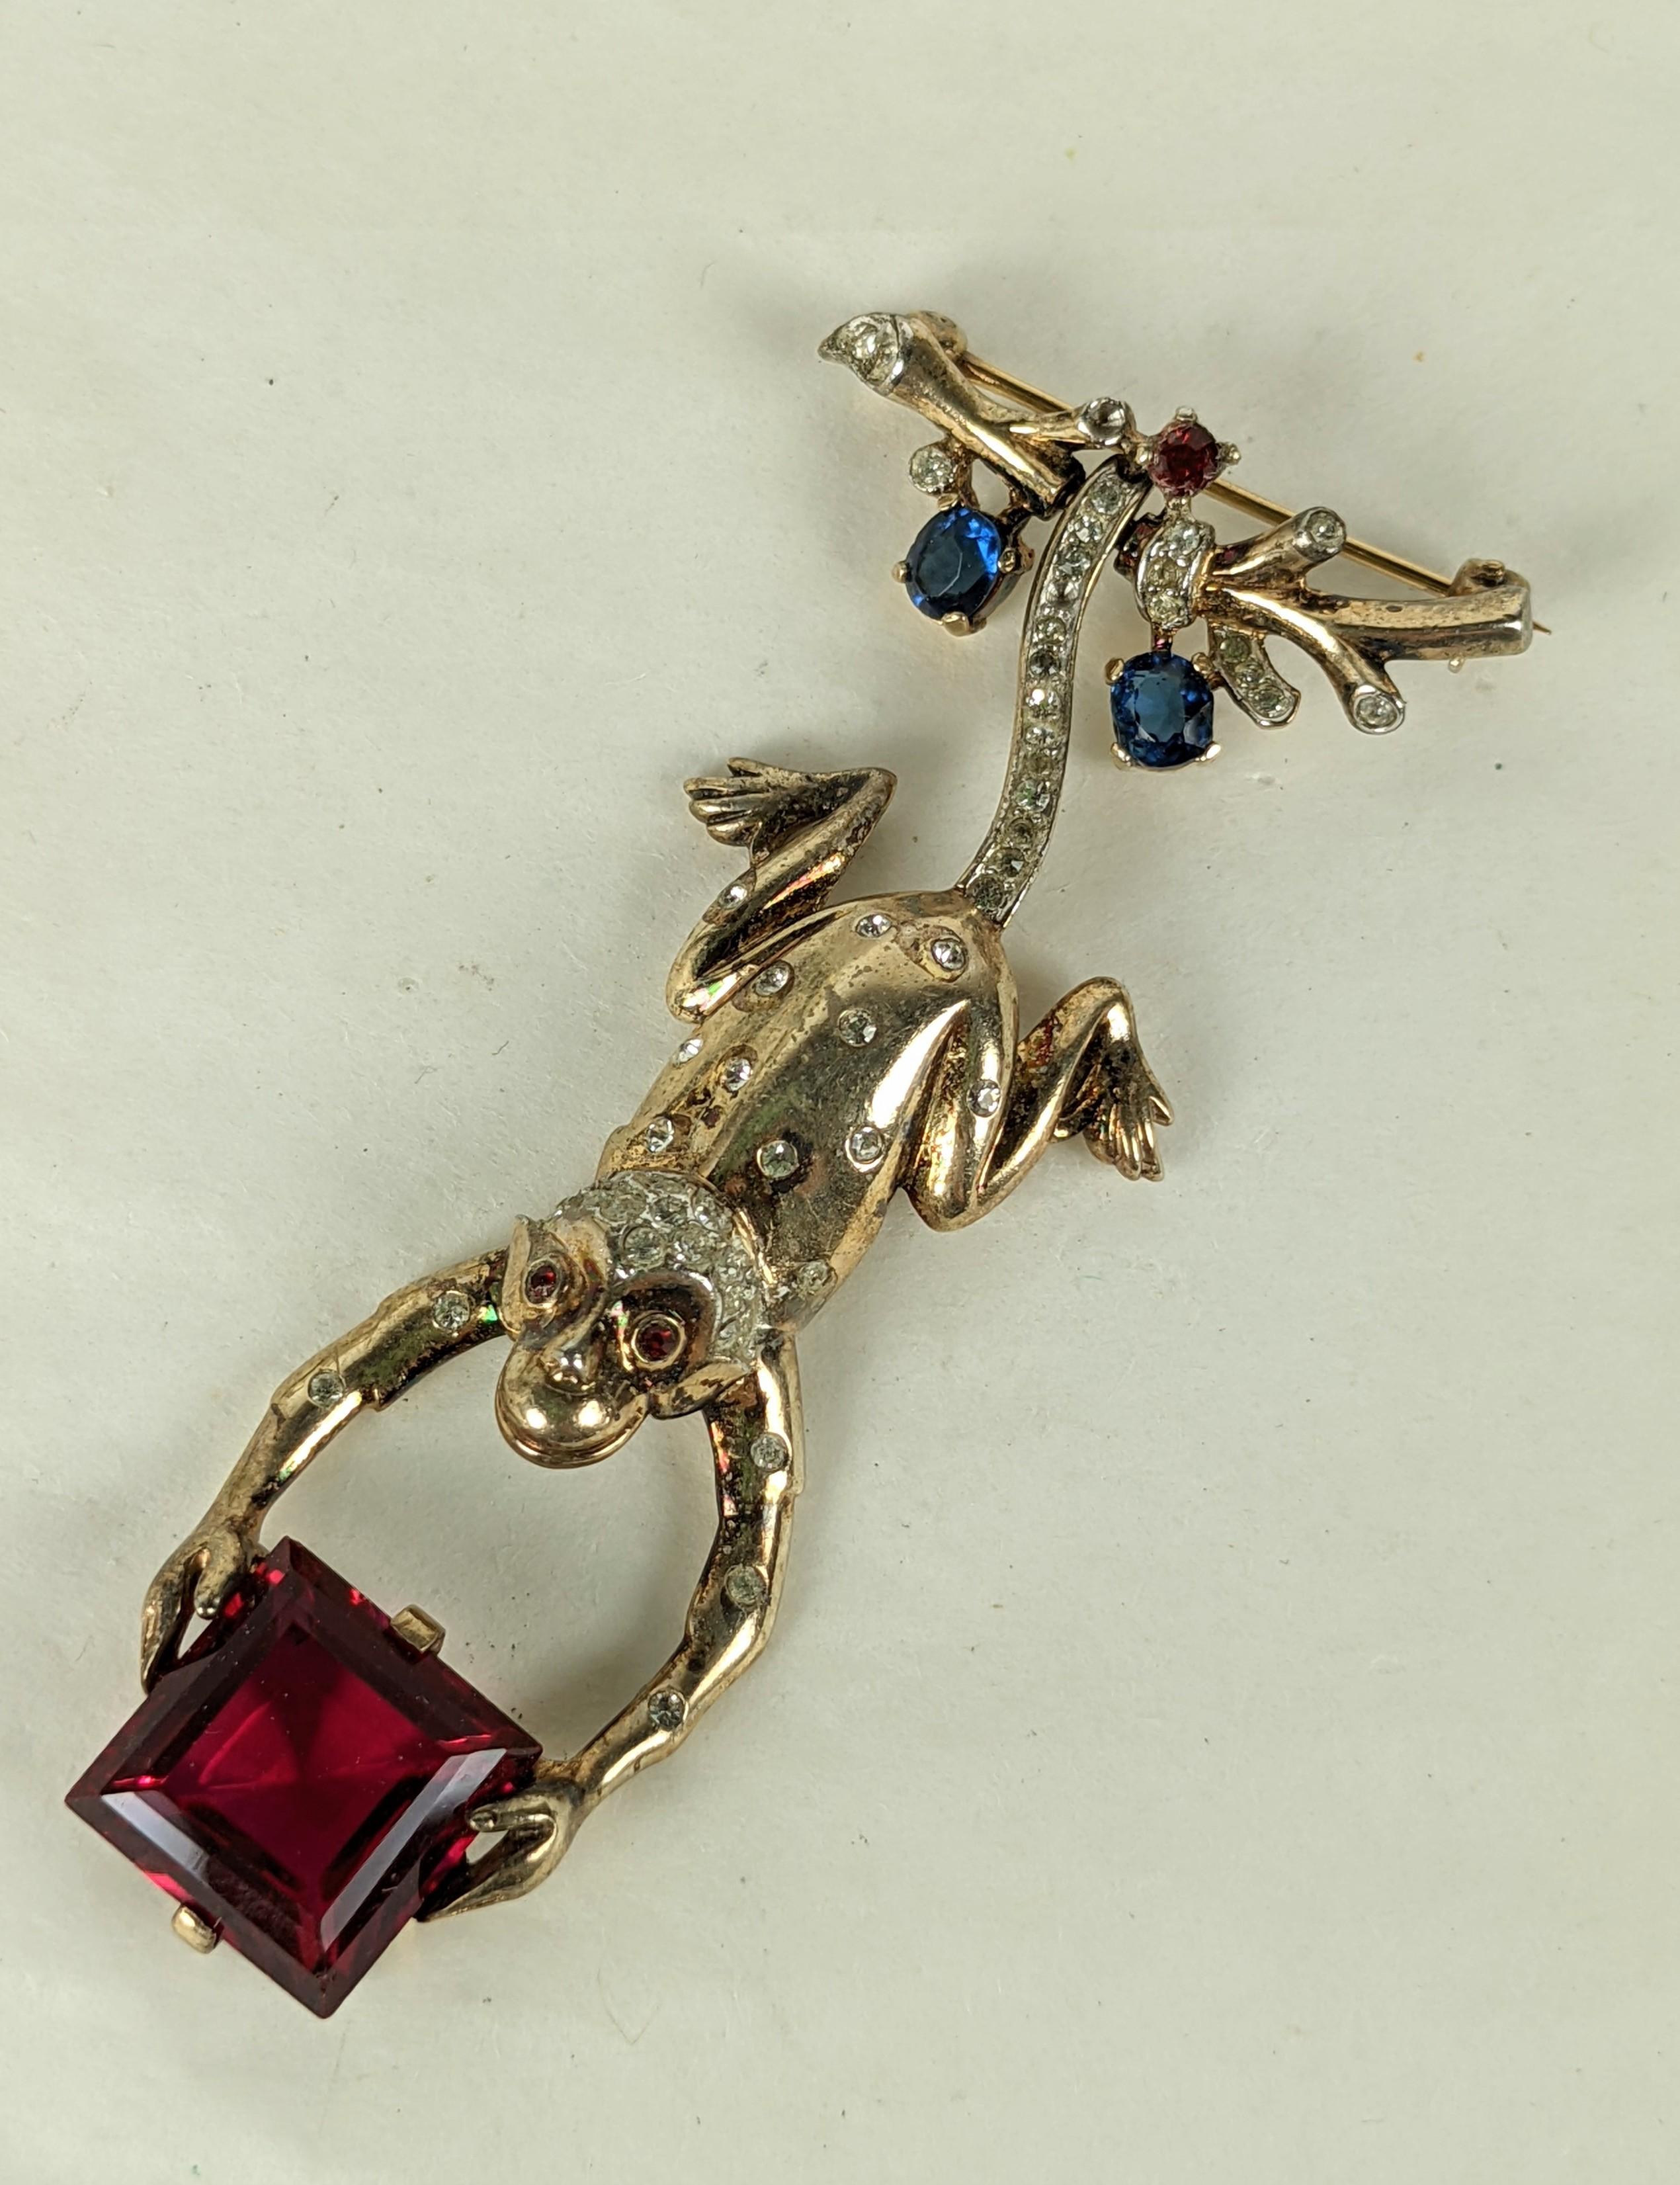 Rare, Collector quality Trifari Hanging Monkey Brooch, by Alfred Phillipe in sterling vermeil with pastes. Charming articulated design which allows monkey to hang from a branch clutching a square cut ruby. 1940's USA. 2.75